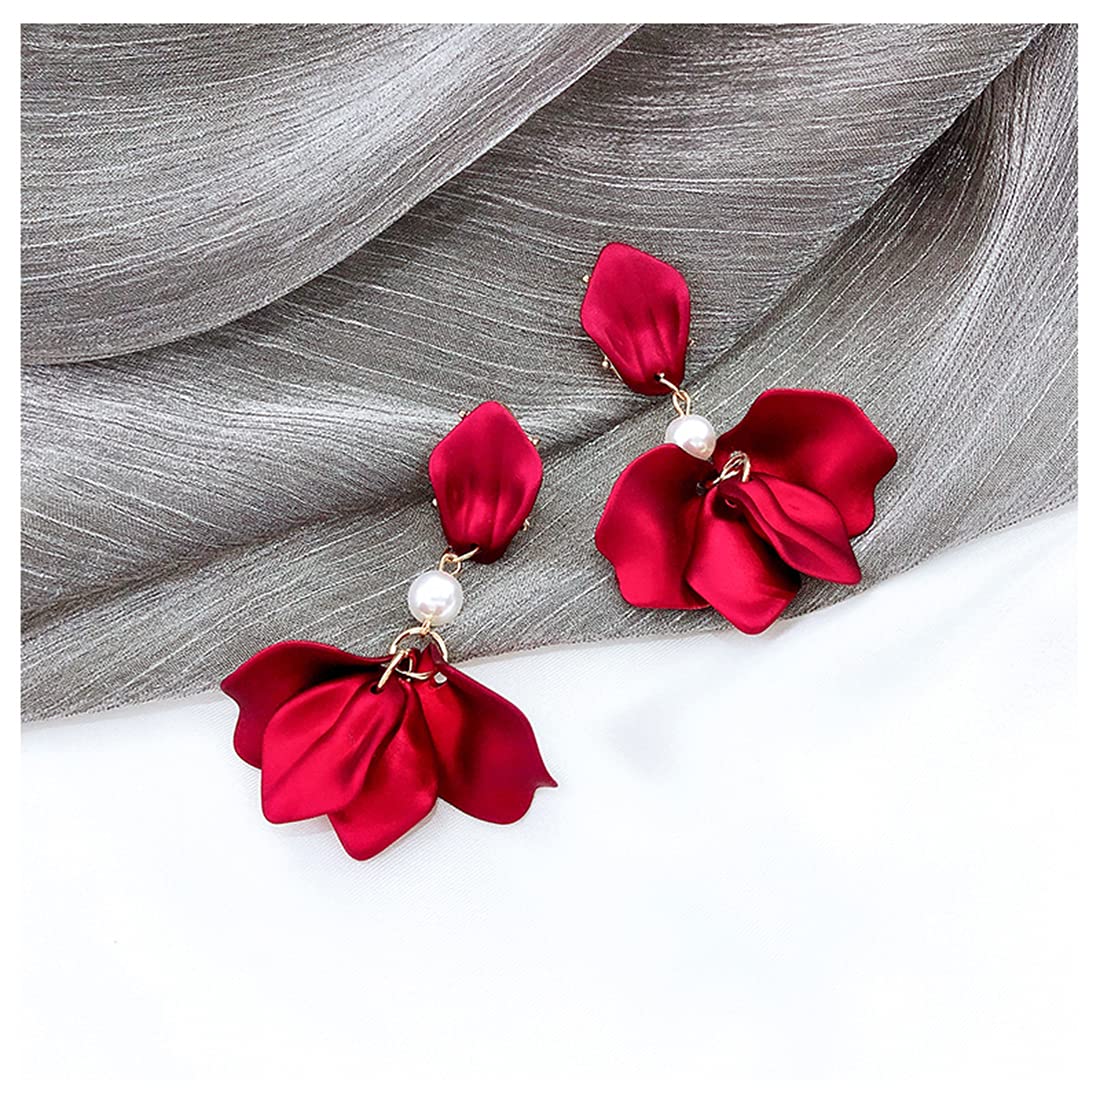 Yellow Chimes Floral Earrings for Women Gold Plated Metallic Red Colour Floral Petals Pearl Drop Earrings for Women and Girls